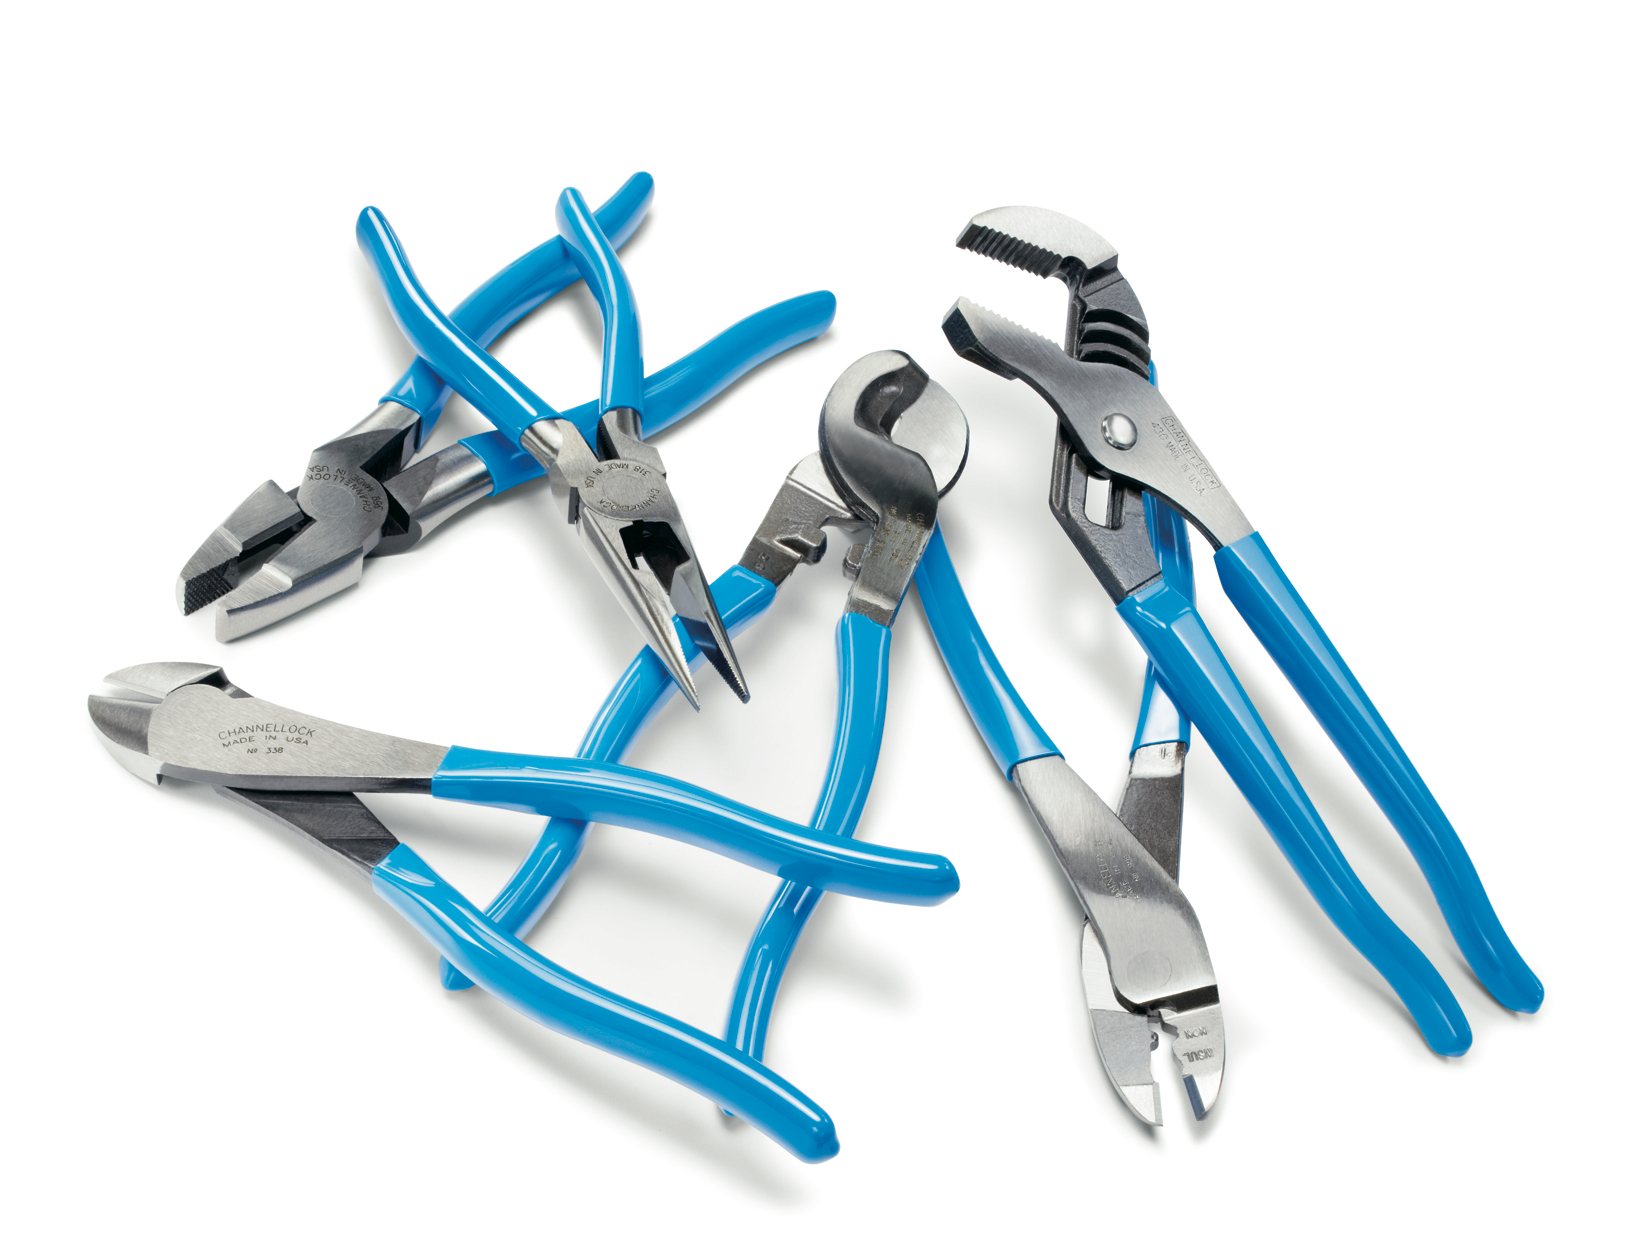 Channellock rescue tools